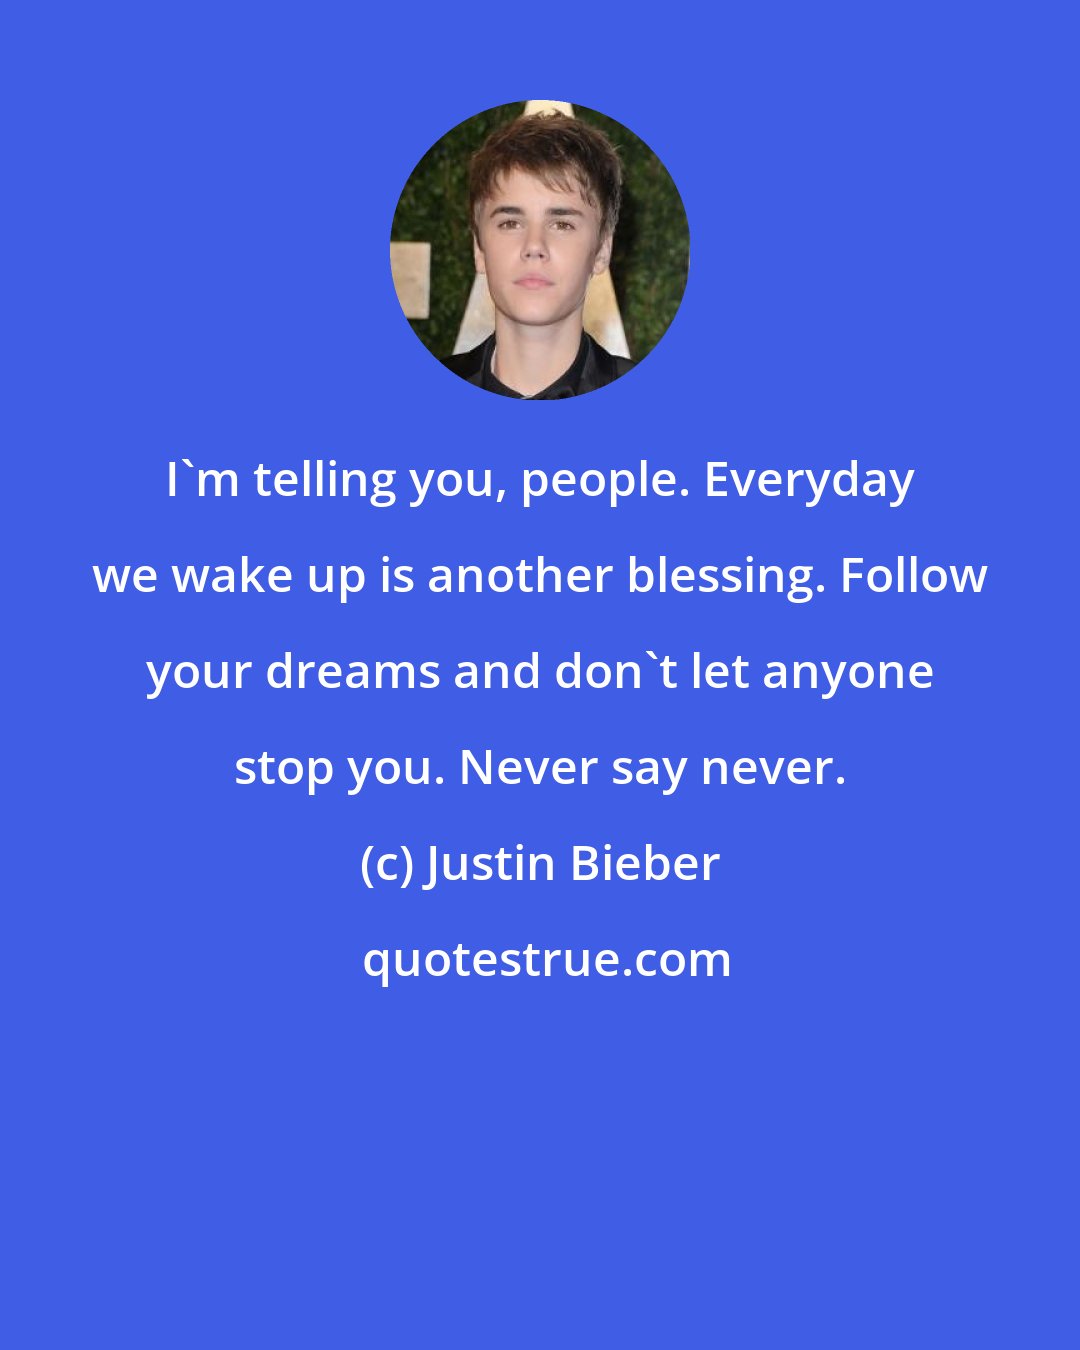 Justin Bieber: I'm telling you, people. Everyday we wake up is another blessing. Follow your dreams and don't let anyone stop you. Never say never.